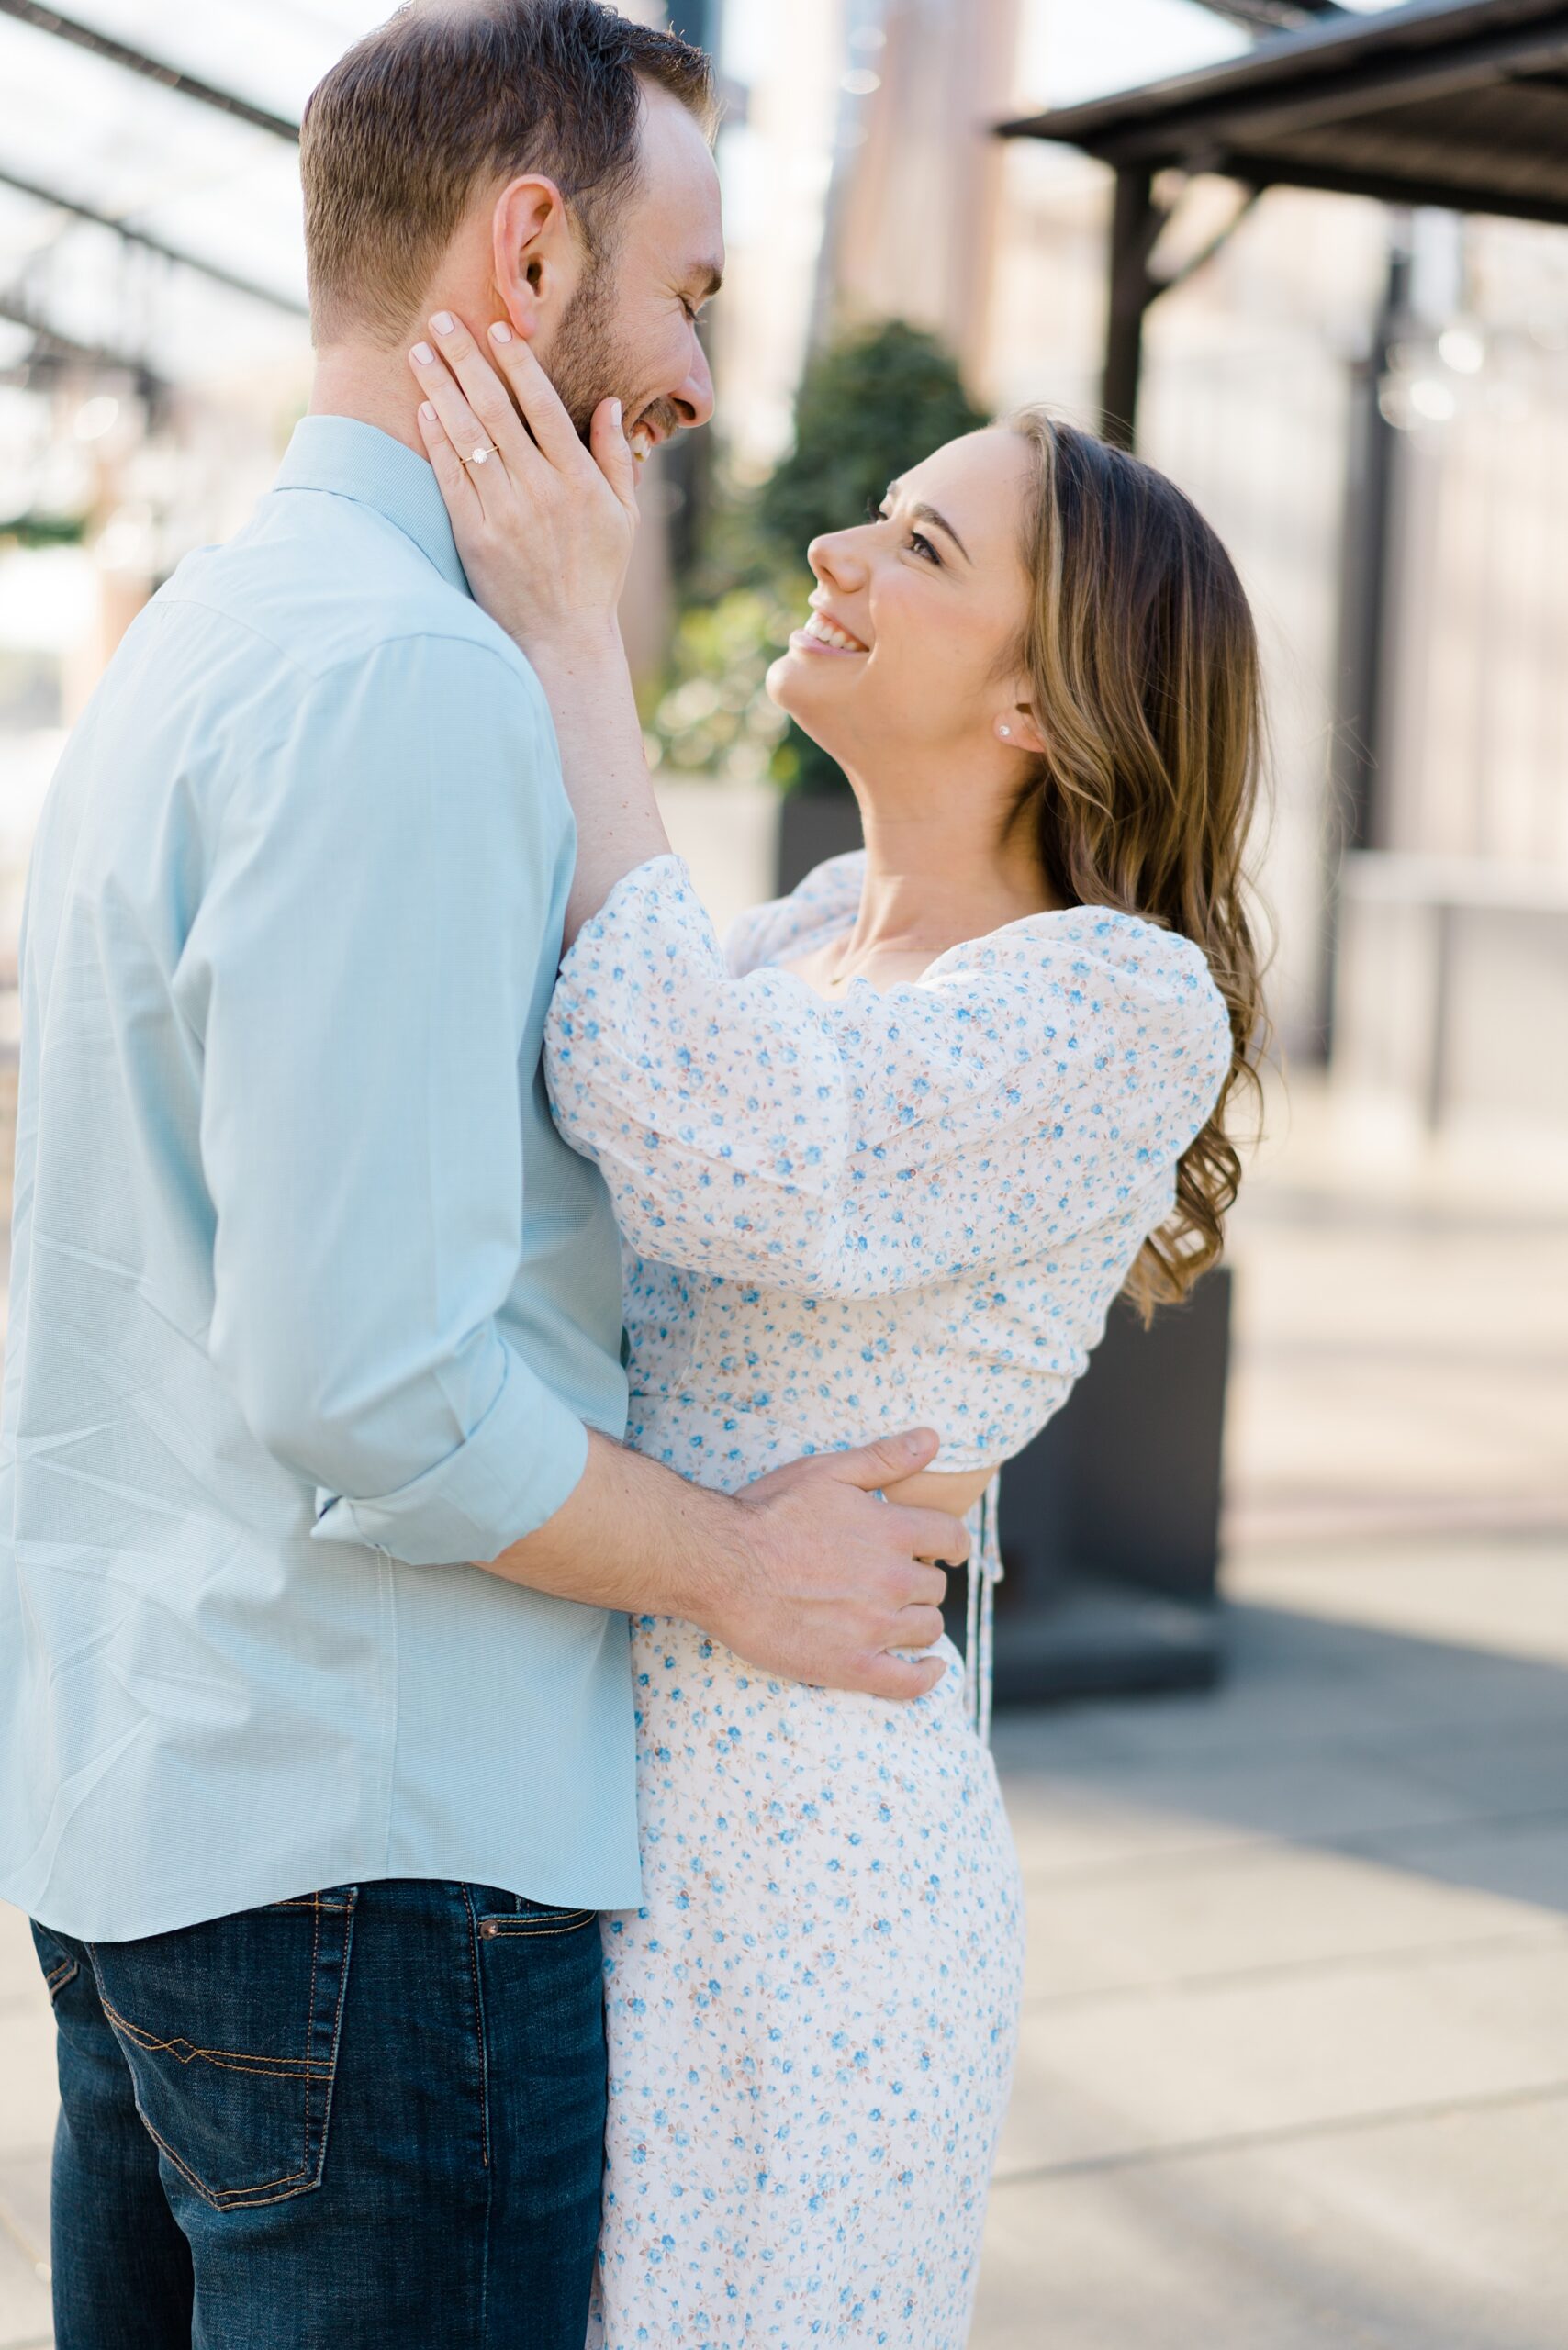 timeless engagement portaits by Light + Airy Philadelphia Engagement Photographer, Amber Dawn